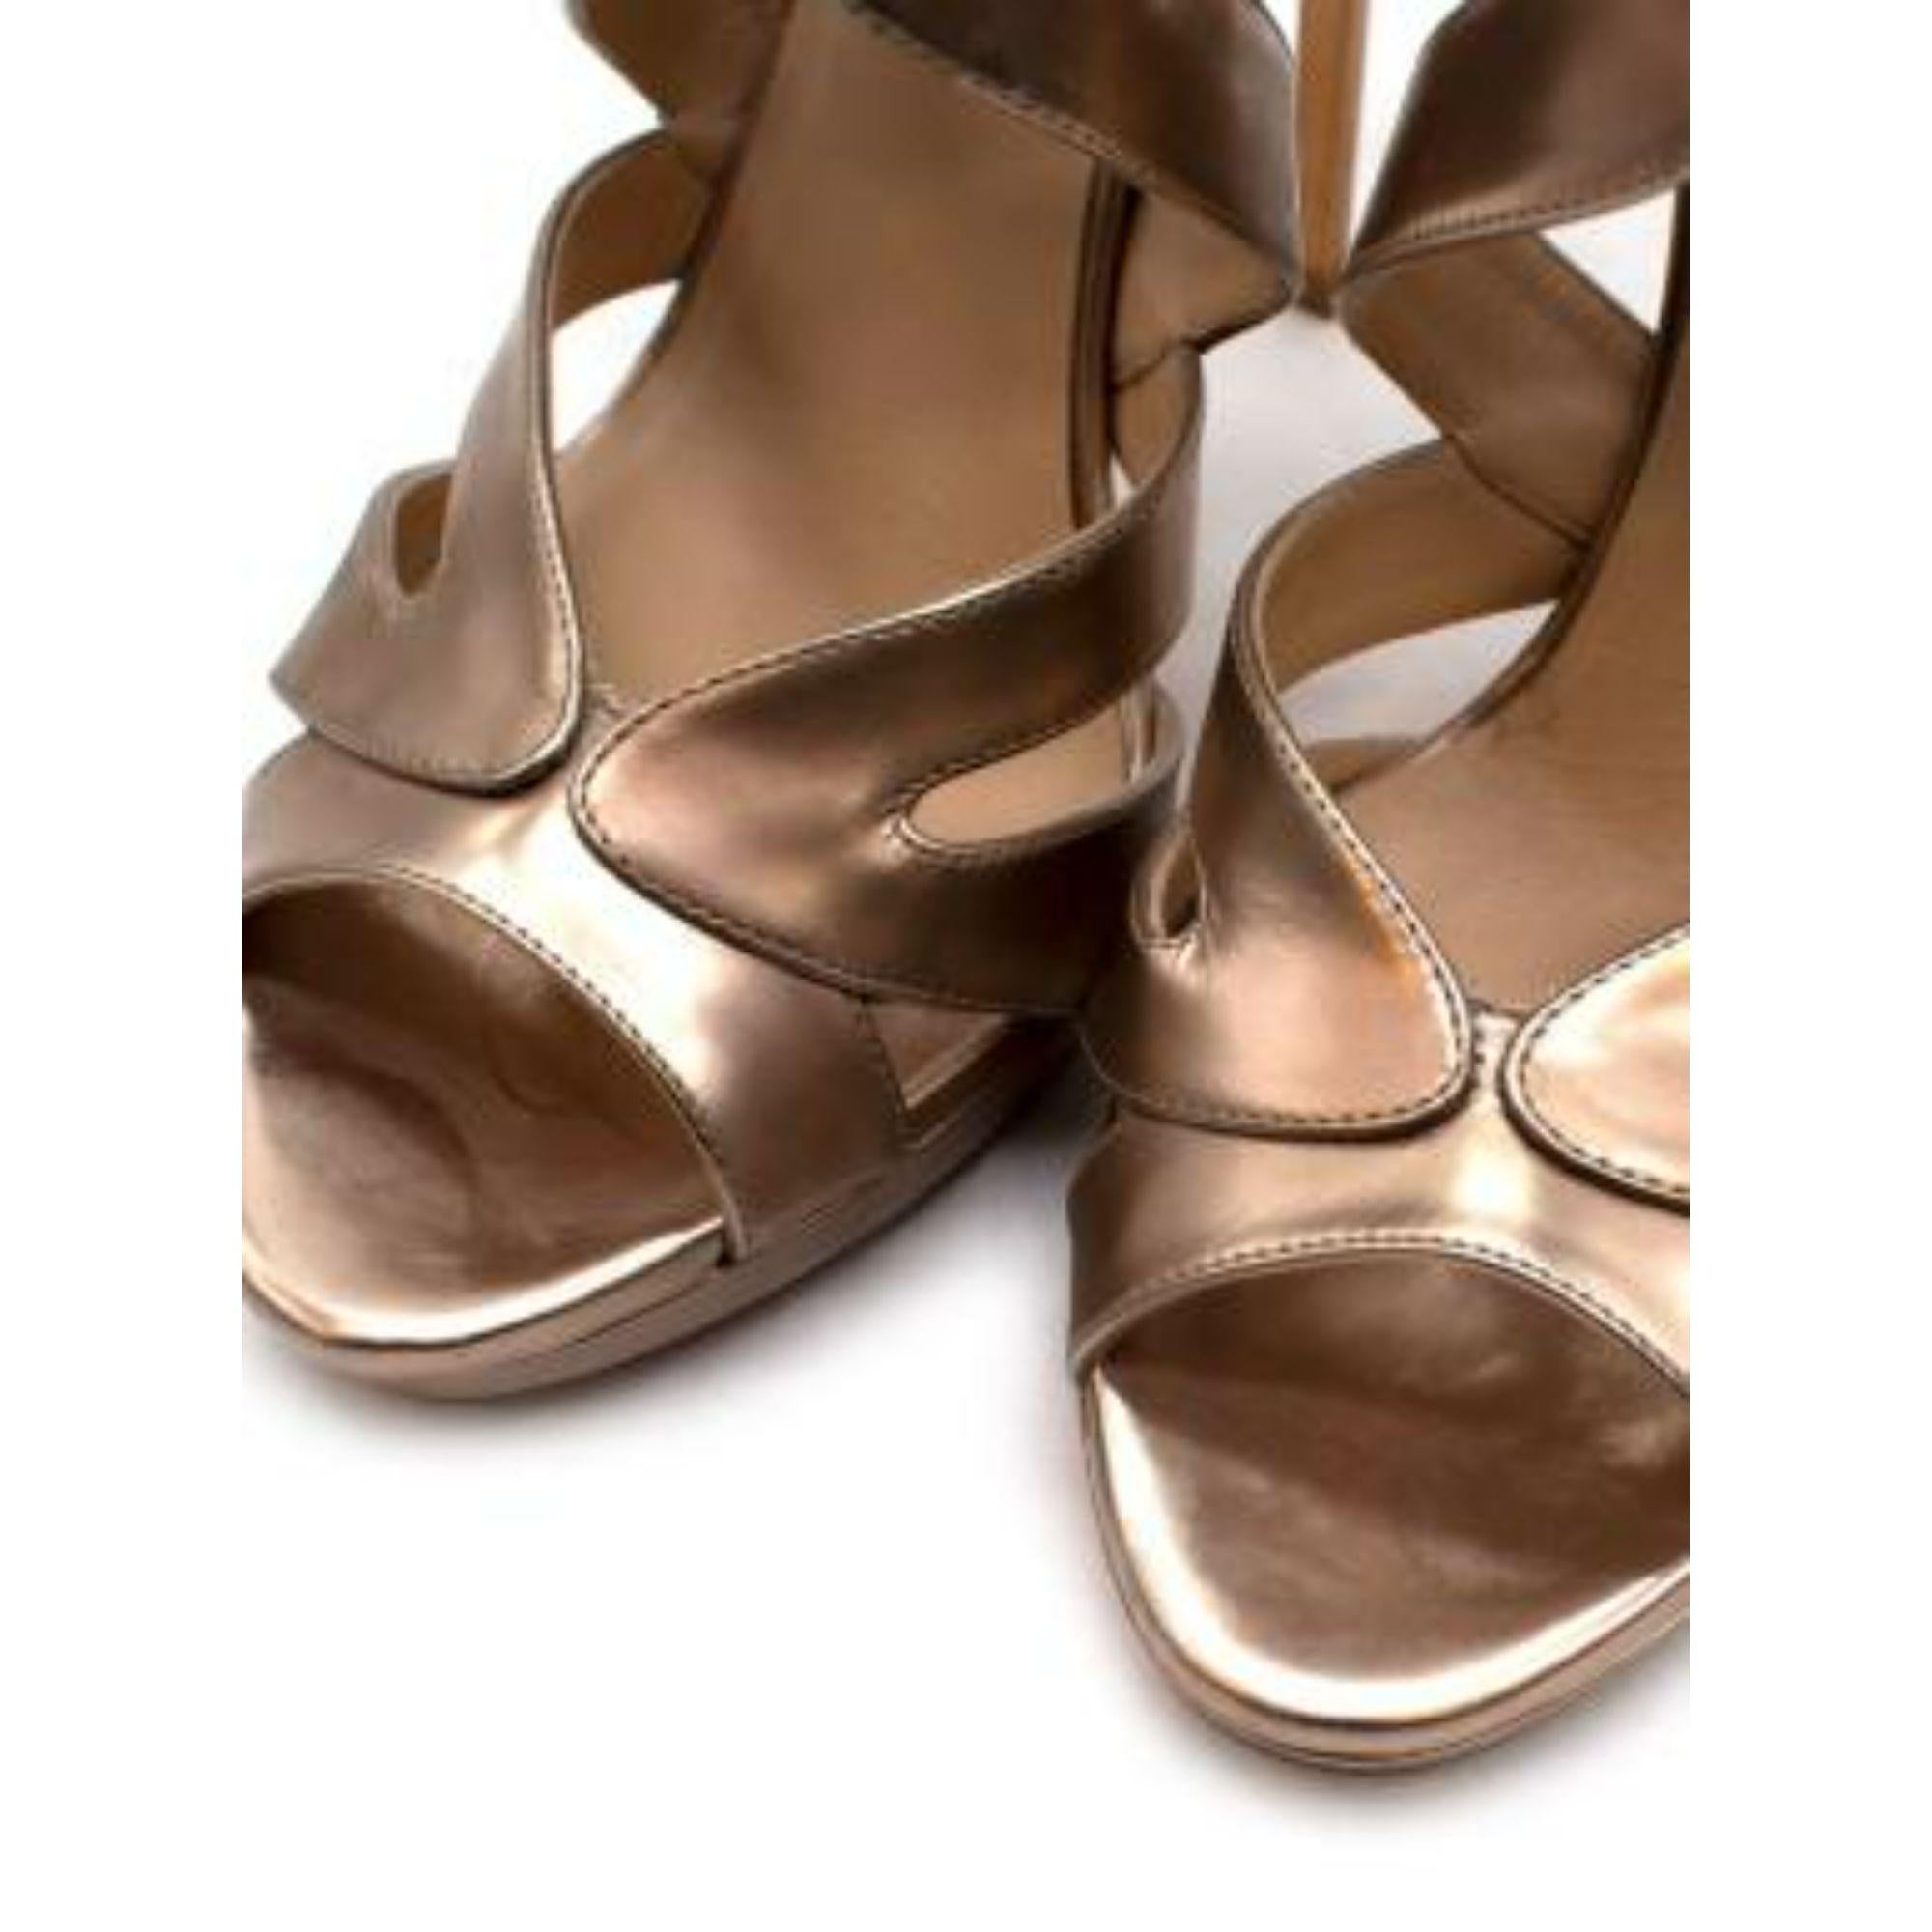 Women's Jimmy Choo Metallic Gold Caged Heeled Sandals For Sale